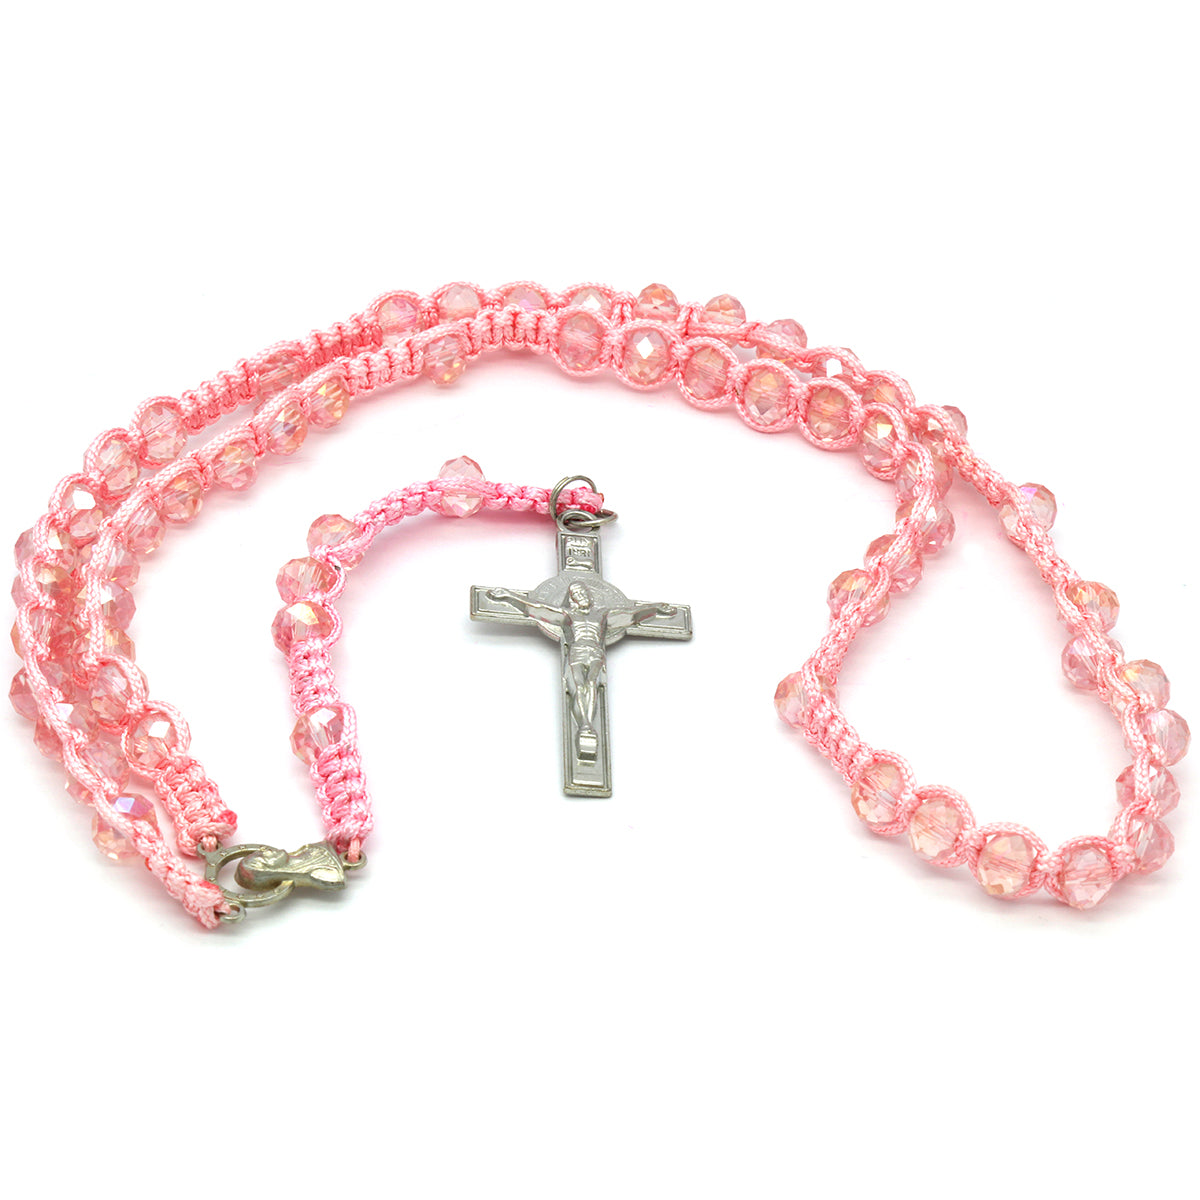 8MM Rose Crystal Fabric Rosary With Cross Pendant